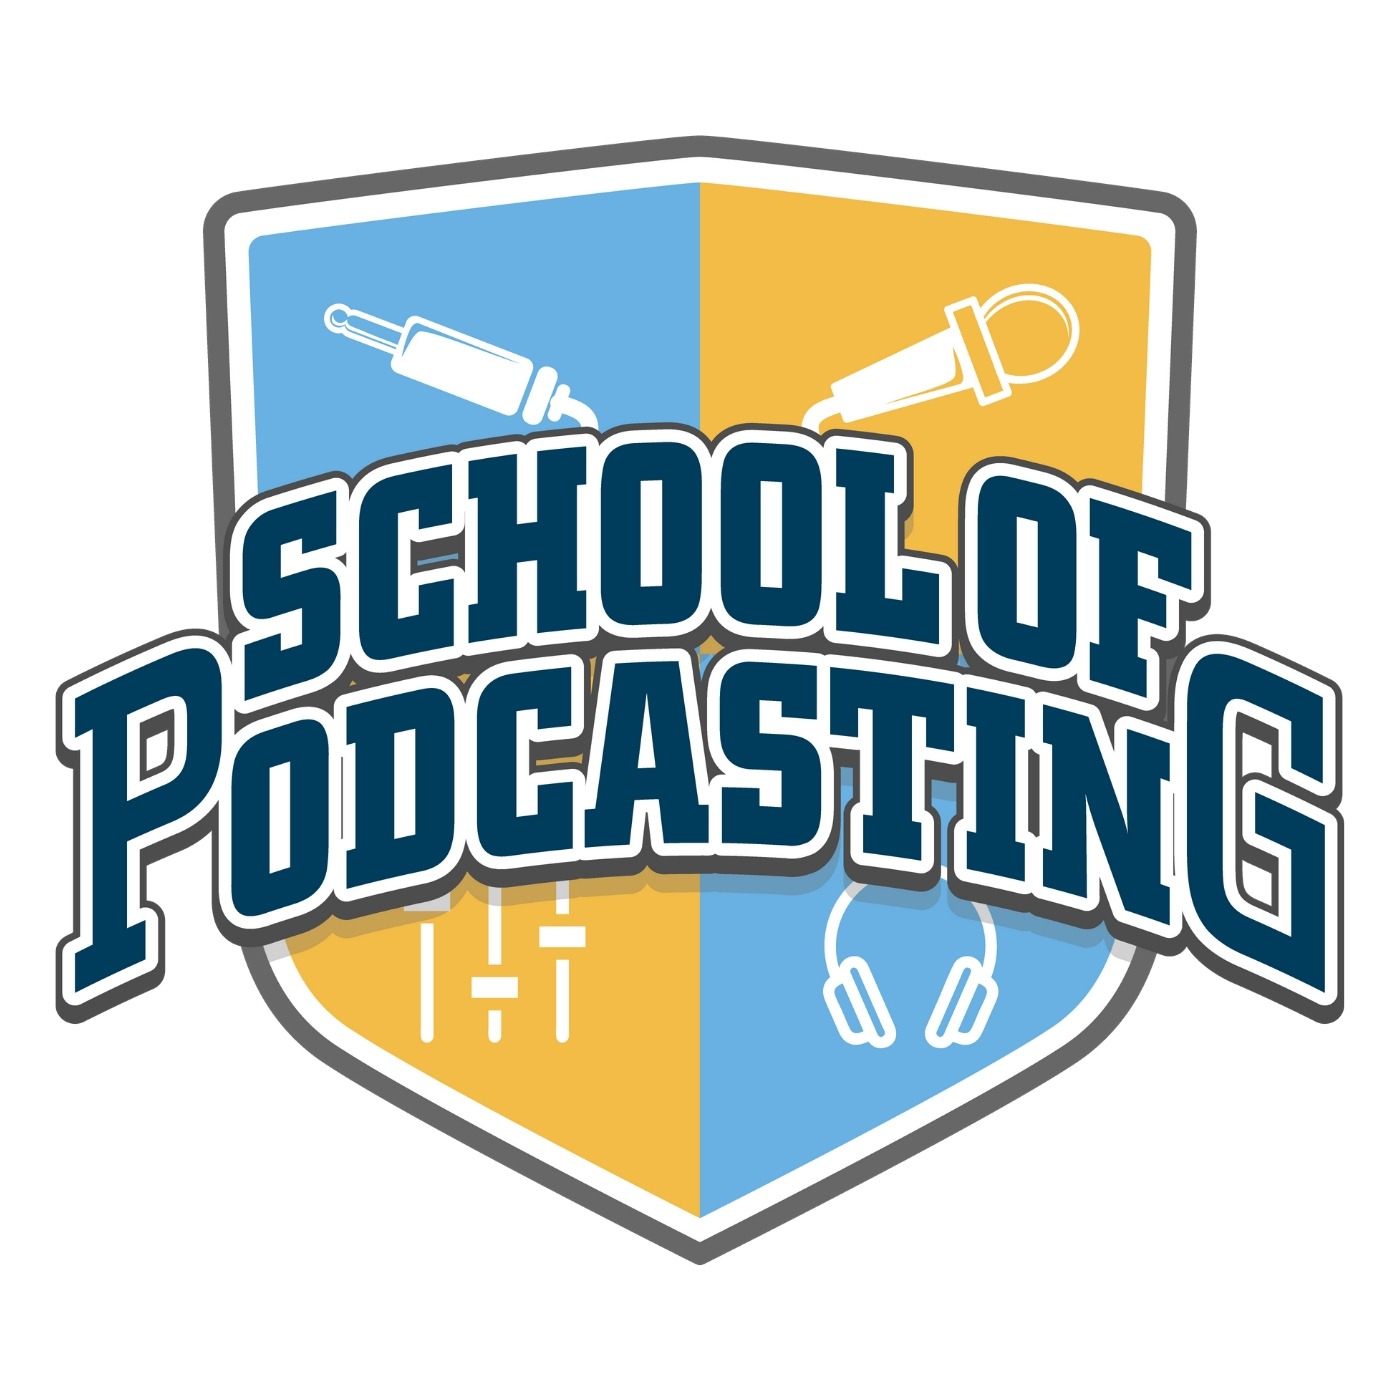 Where's The School of Podcasting? Image